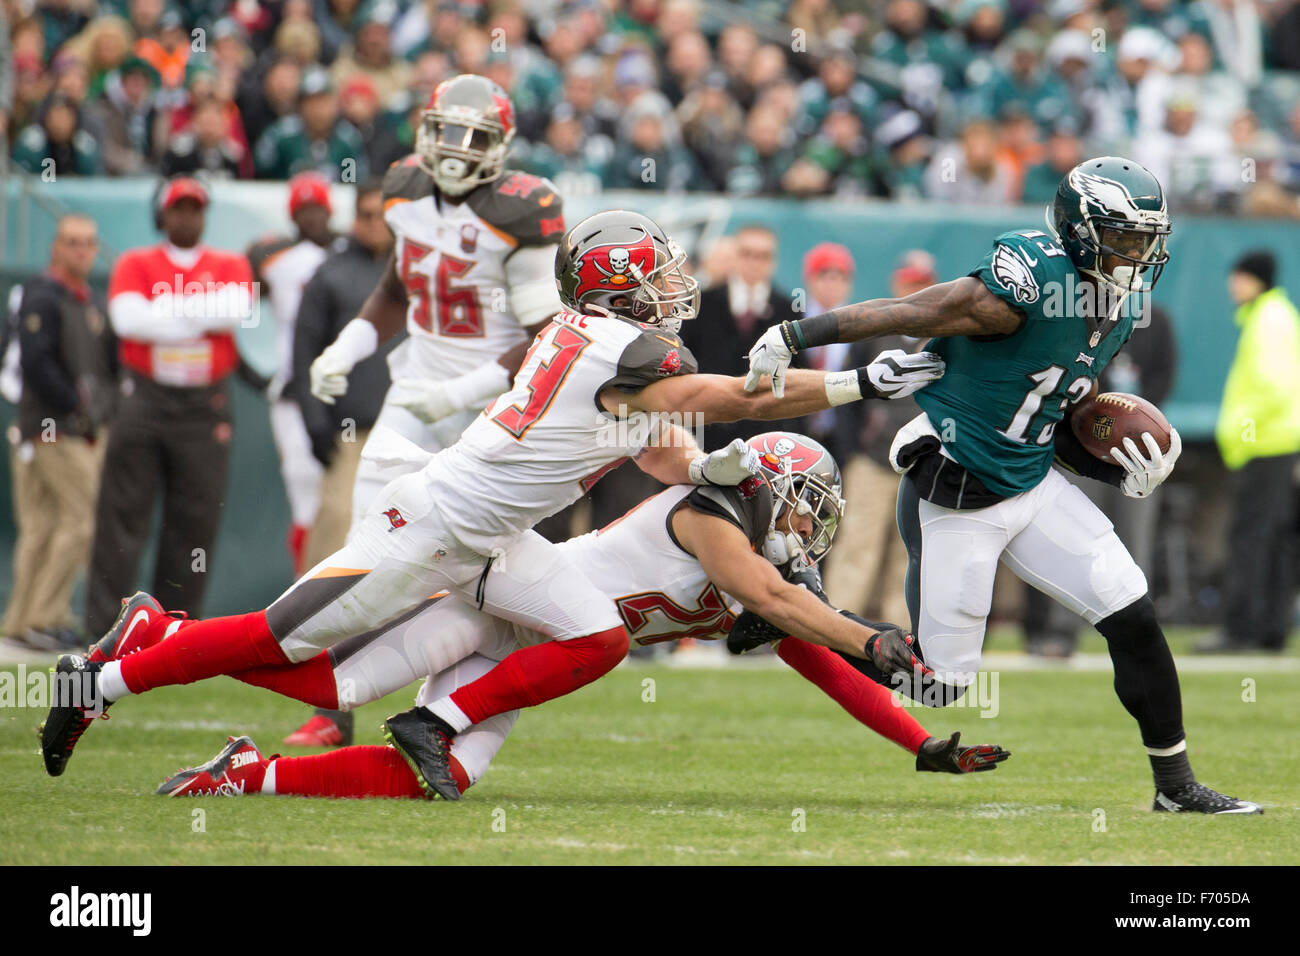 Philadelphia, Pennsylvania, USA. 22nd Nov, 2015. Philadelphia Eagles wide receiver Josh Huff (13) runs with the ball after the catch as he slips past Tampa Bay Buccaneers strong safety Chris Conte (23) and cornerback Sterling Moore (26) during the NFL game between the Tampa Bay Buccaneers and the Philadelphia Eagles at Lincoln Financial Field in Philadelphia, Pennsylvania. Christopher Szagola/CSM/Alamy Live News Stock Photo